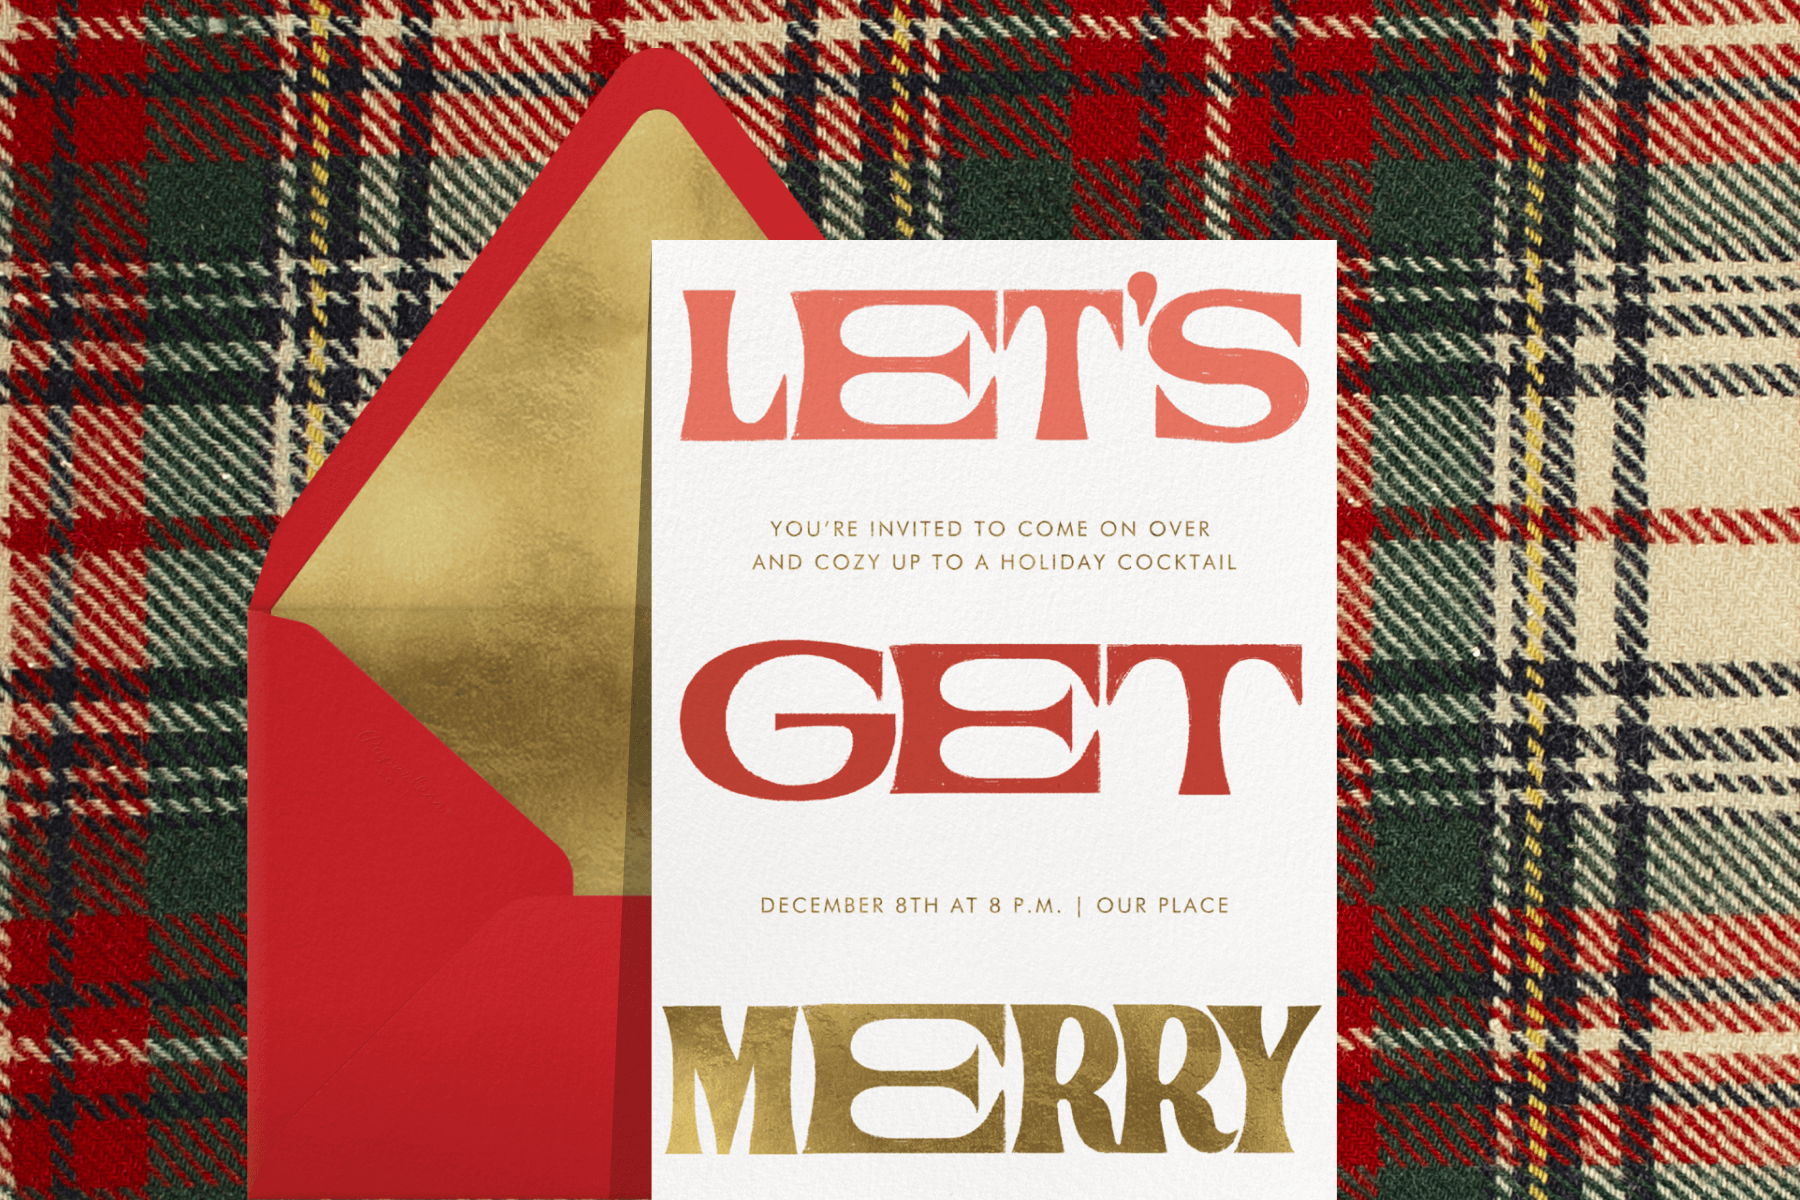 A white holiday party invitation with graphic text that reads “let’s get merry” paired with a red envelope on a plaid background.